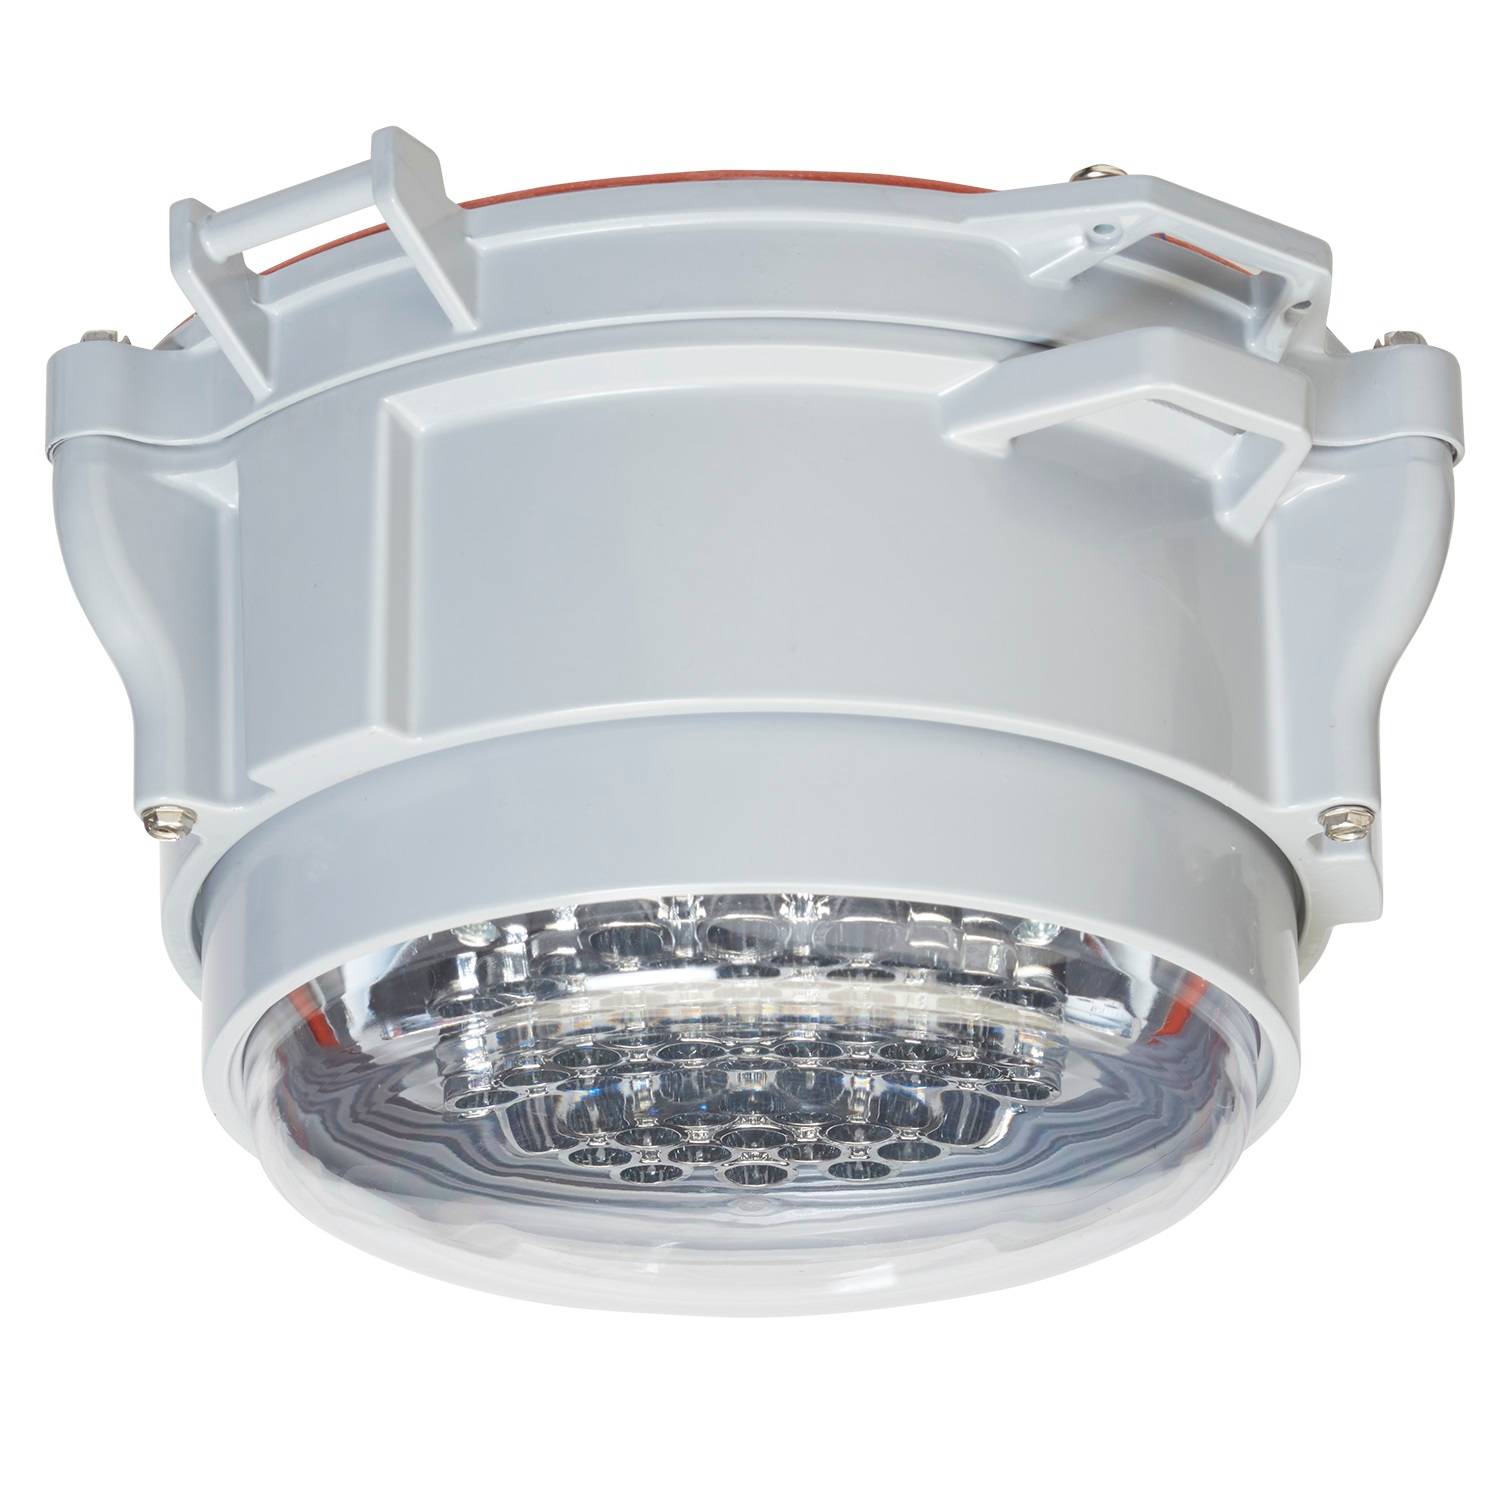 Appleton® IVMV5LCG5BU Contender™ Enclosed Gasketed Round LED Luminaire, LED Lamp, 48/48 to 50.2 W Fixture, 120 to 277 VAC, 125 to 300 VDC, Epoxy Powder Coated Housing